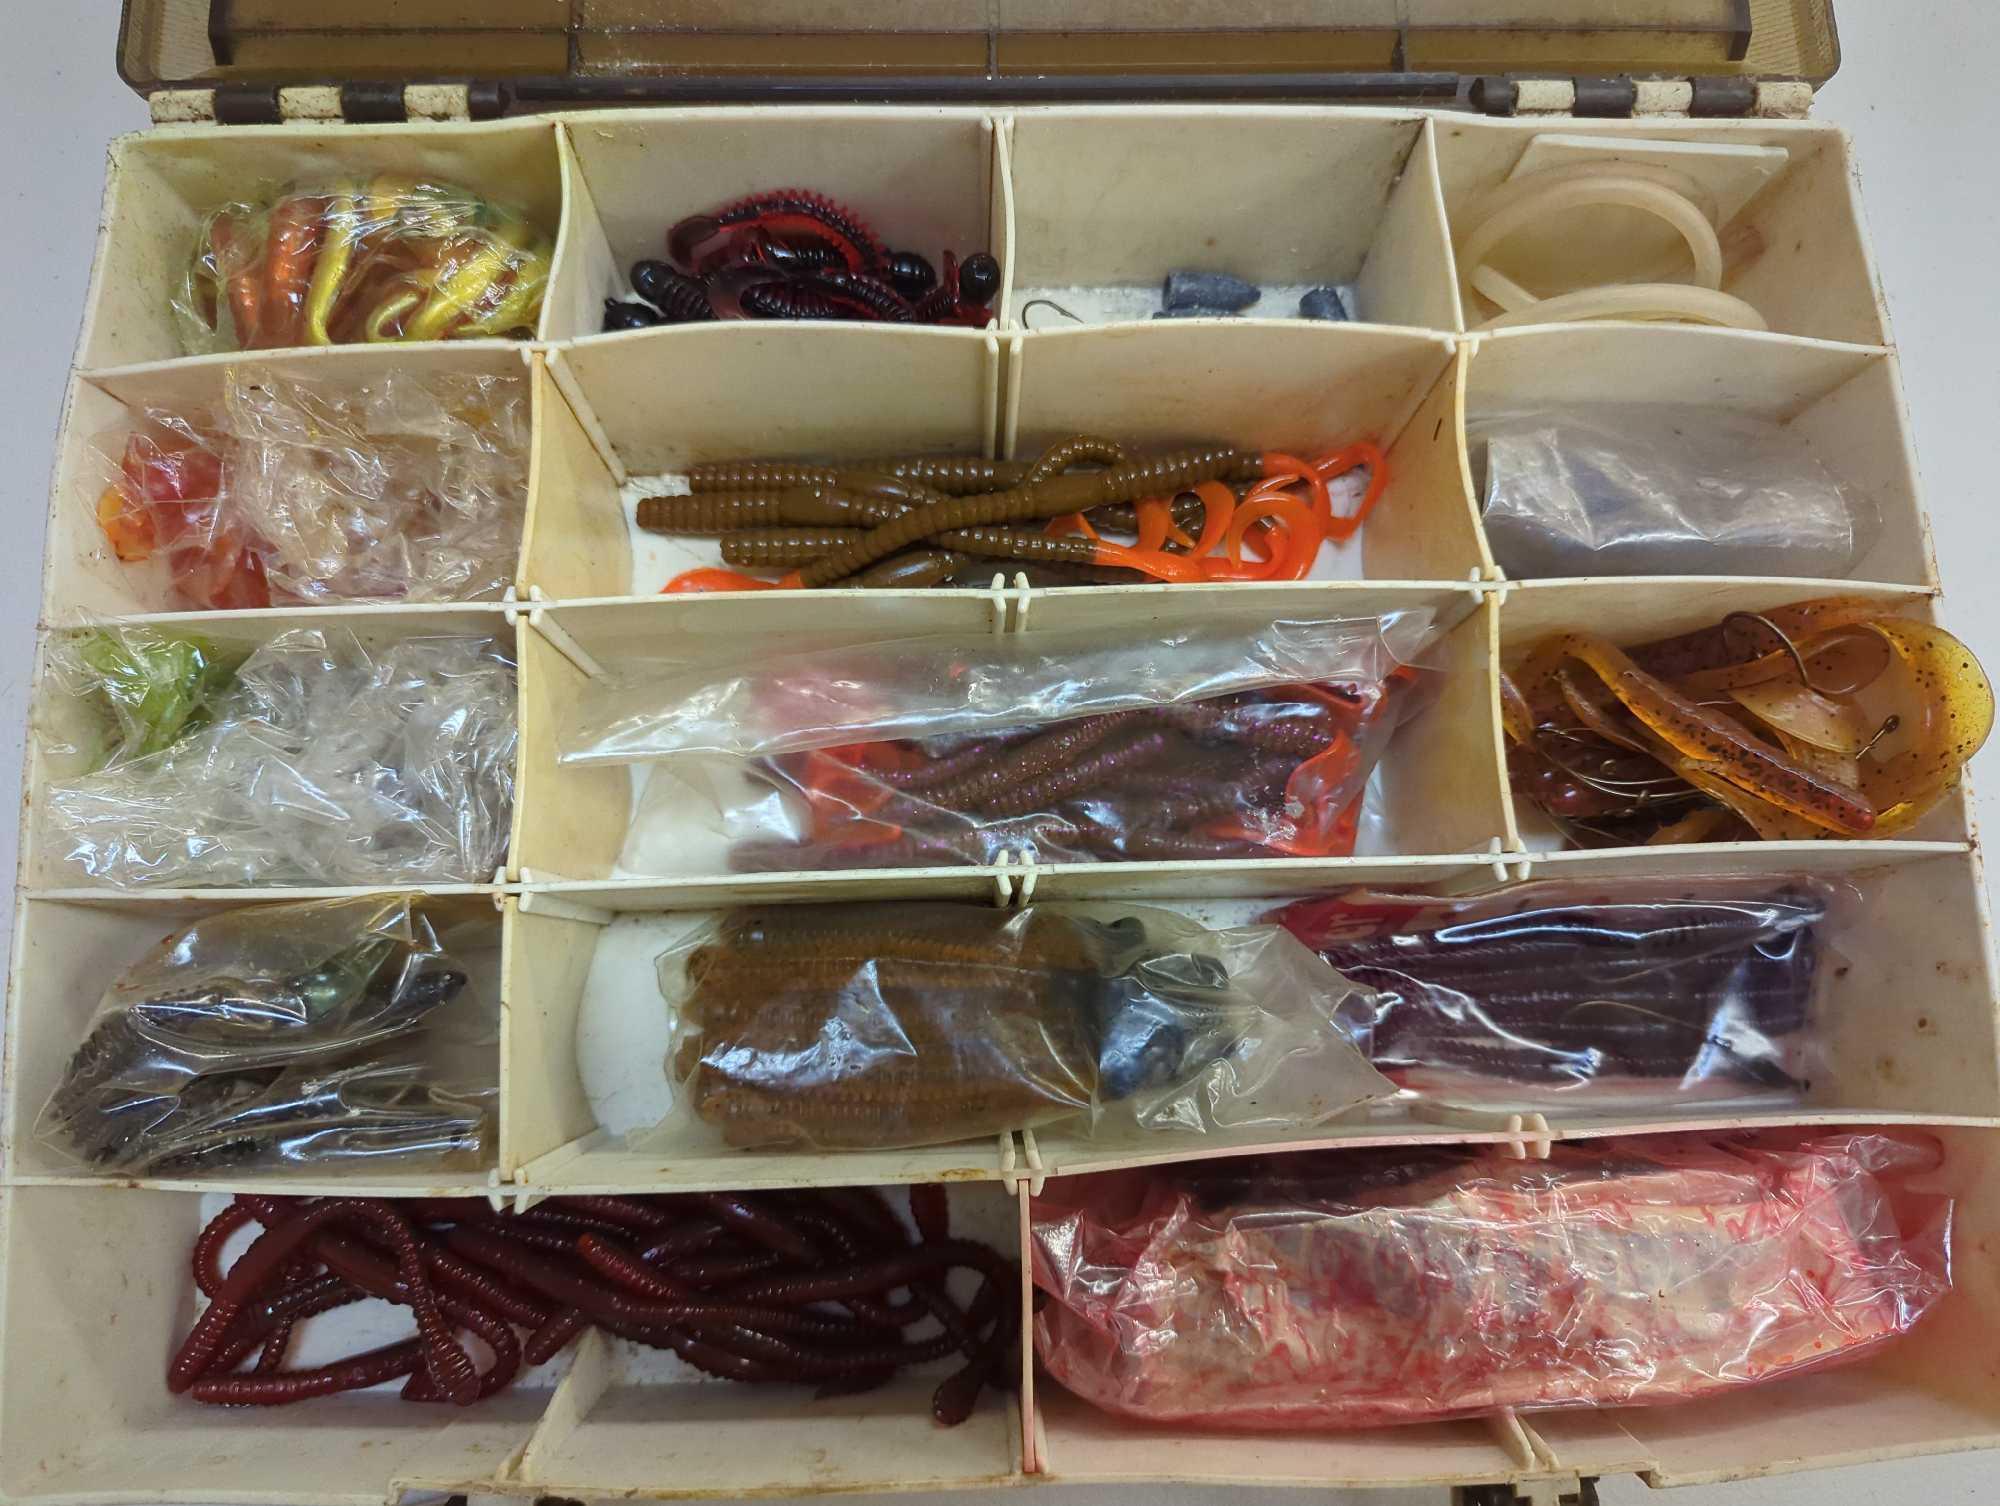 Tackle Box and contents including worms and various fishing lures. Comes as is shown in photos.